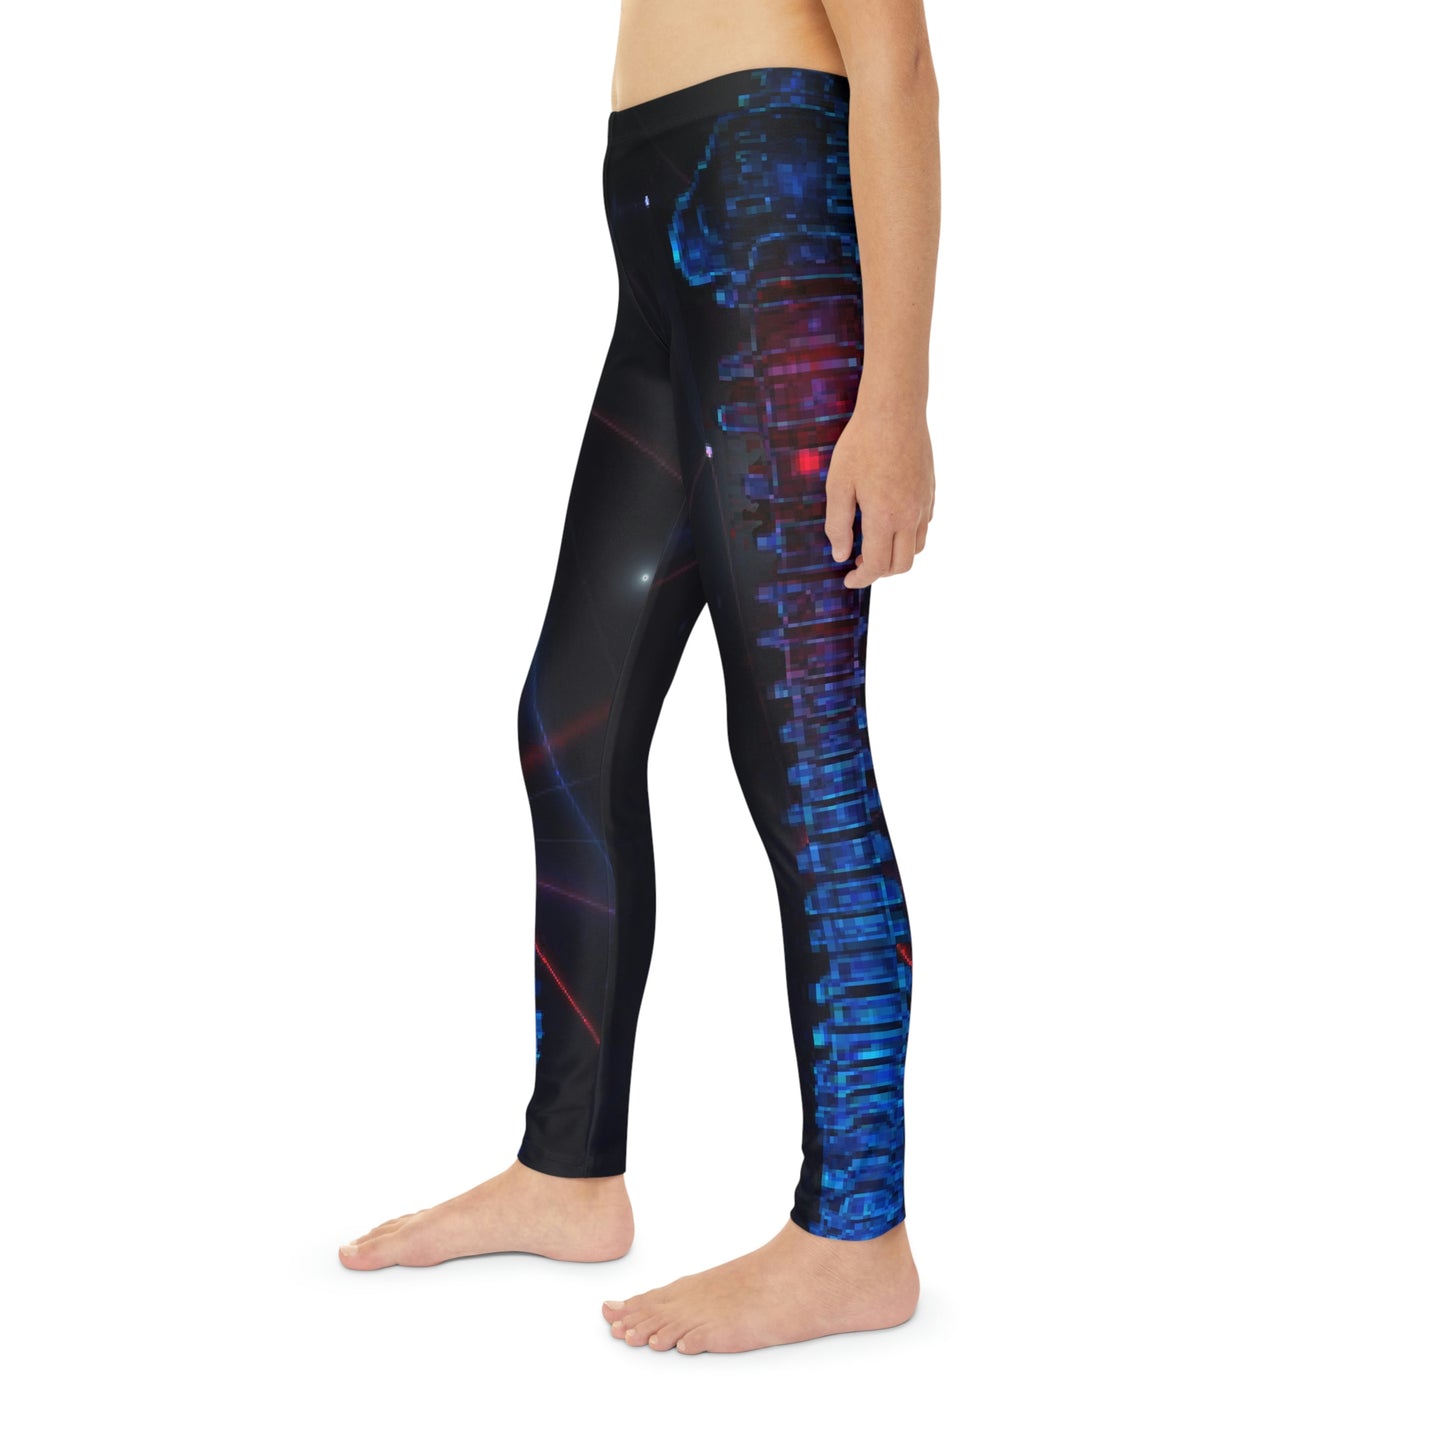 Spine Anatomy Youth Leggings, One of a Kind Gift - Workout Activewear tights for kids, Granddaughter, Niece Christmas Gift